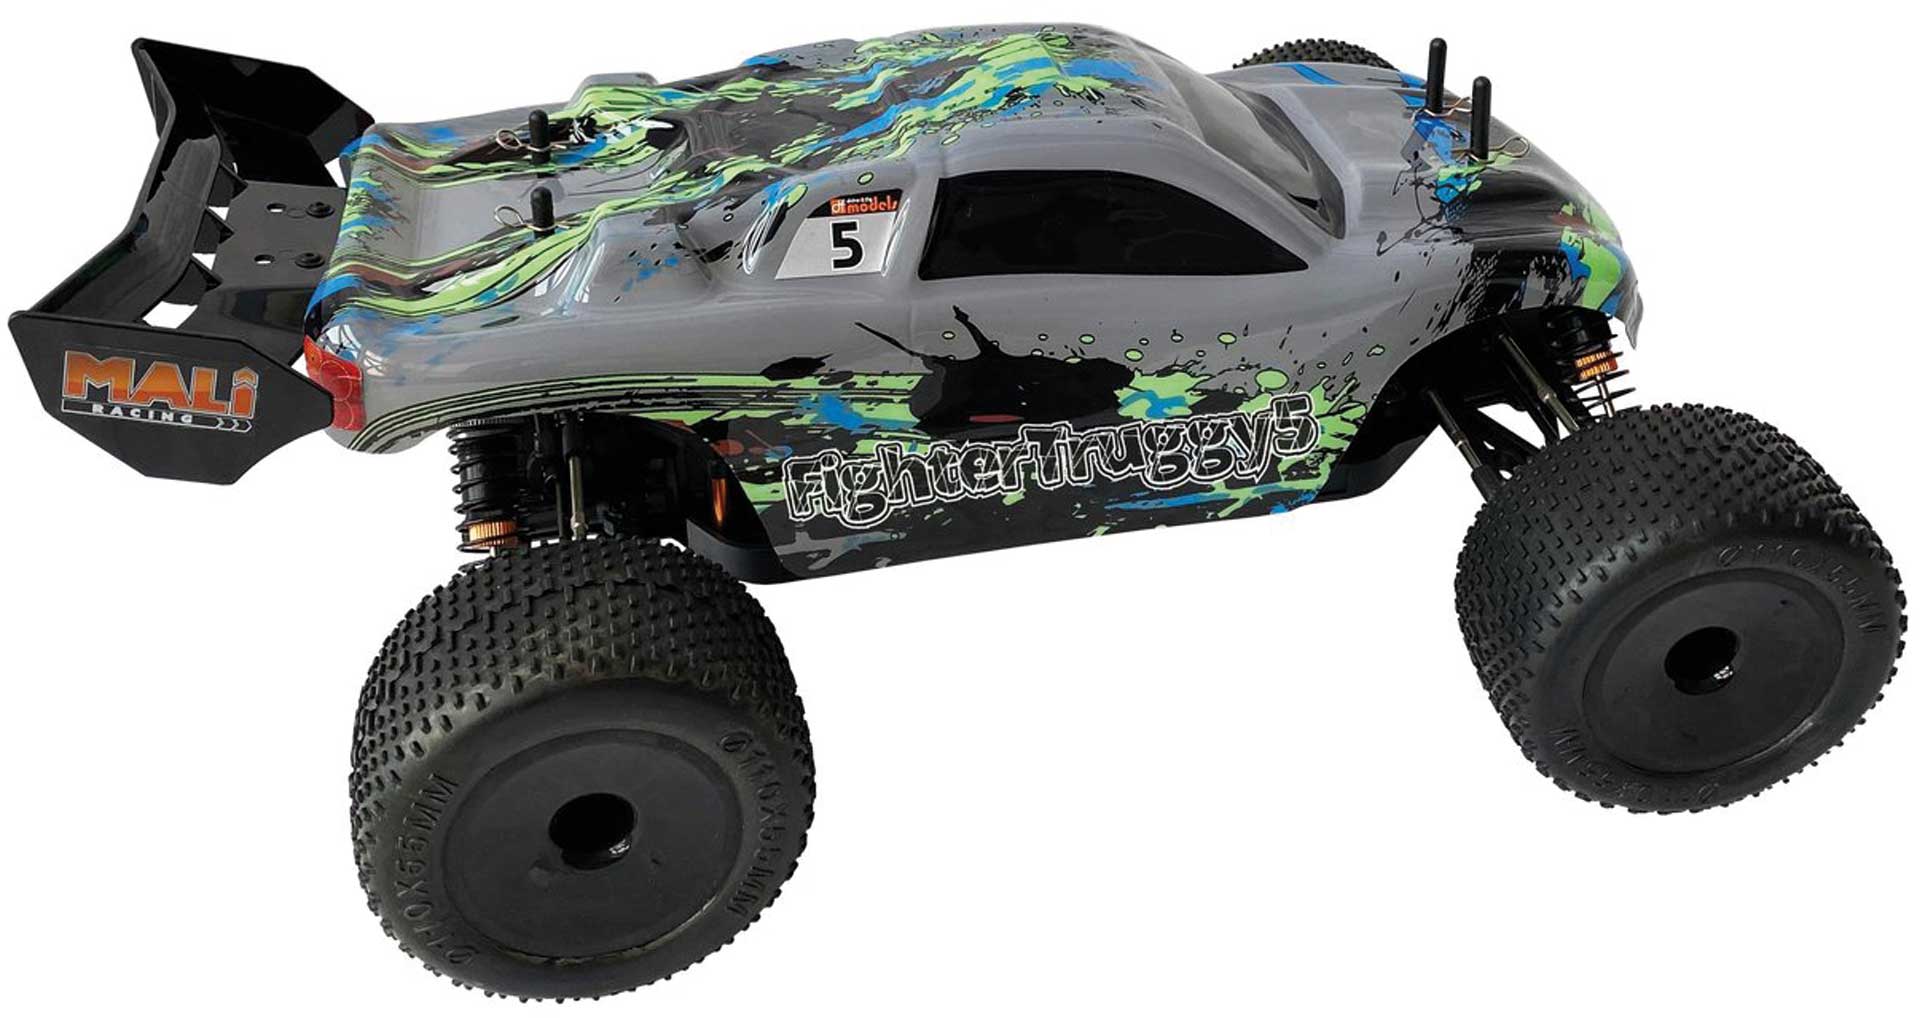 DRIVE & FLY MODELS FIGHTER TRUGGY 5 BRUSHLESS RTR 1/10 4WD